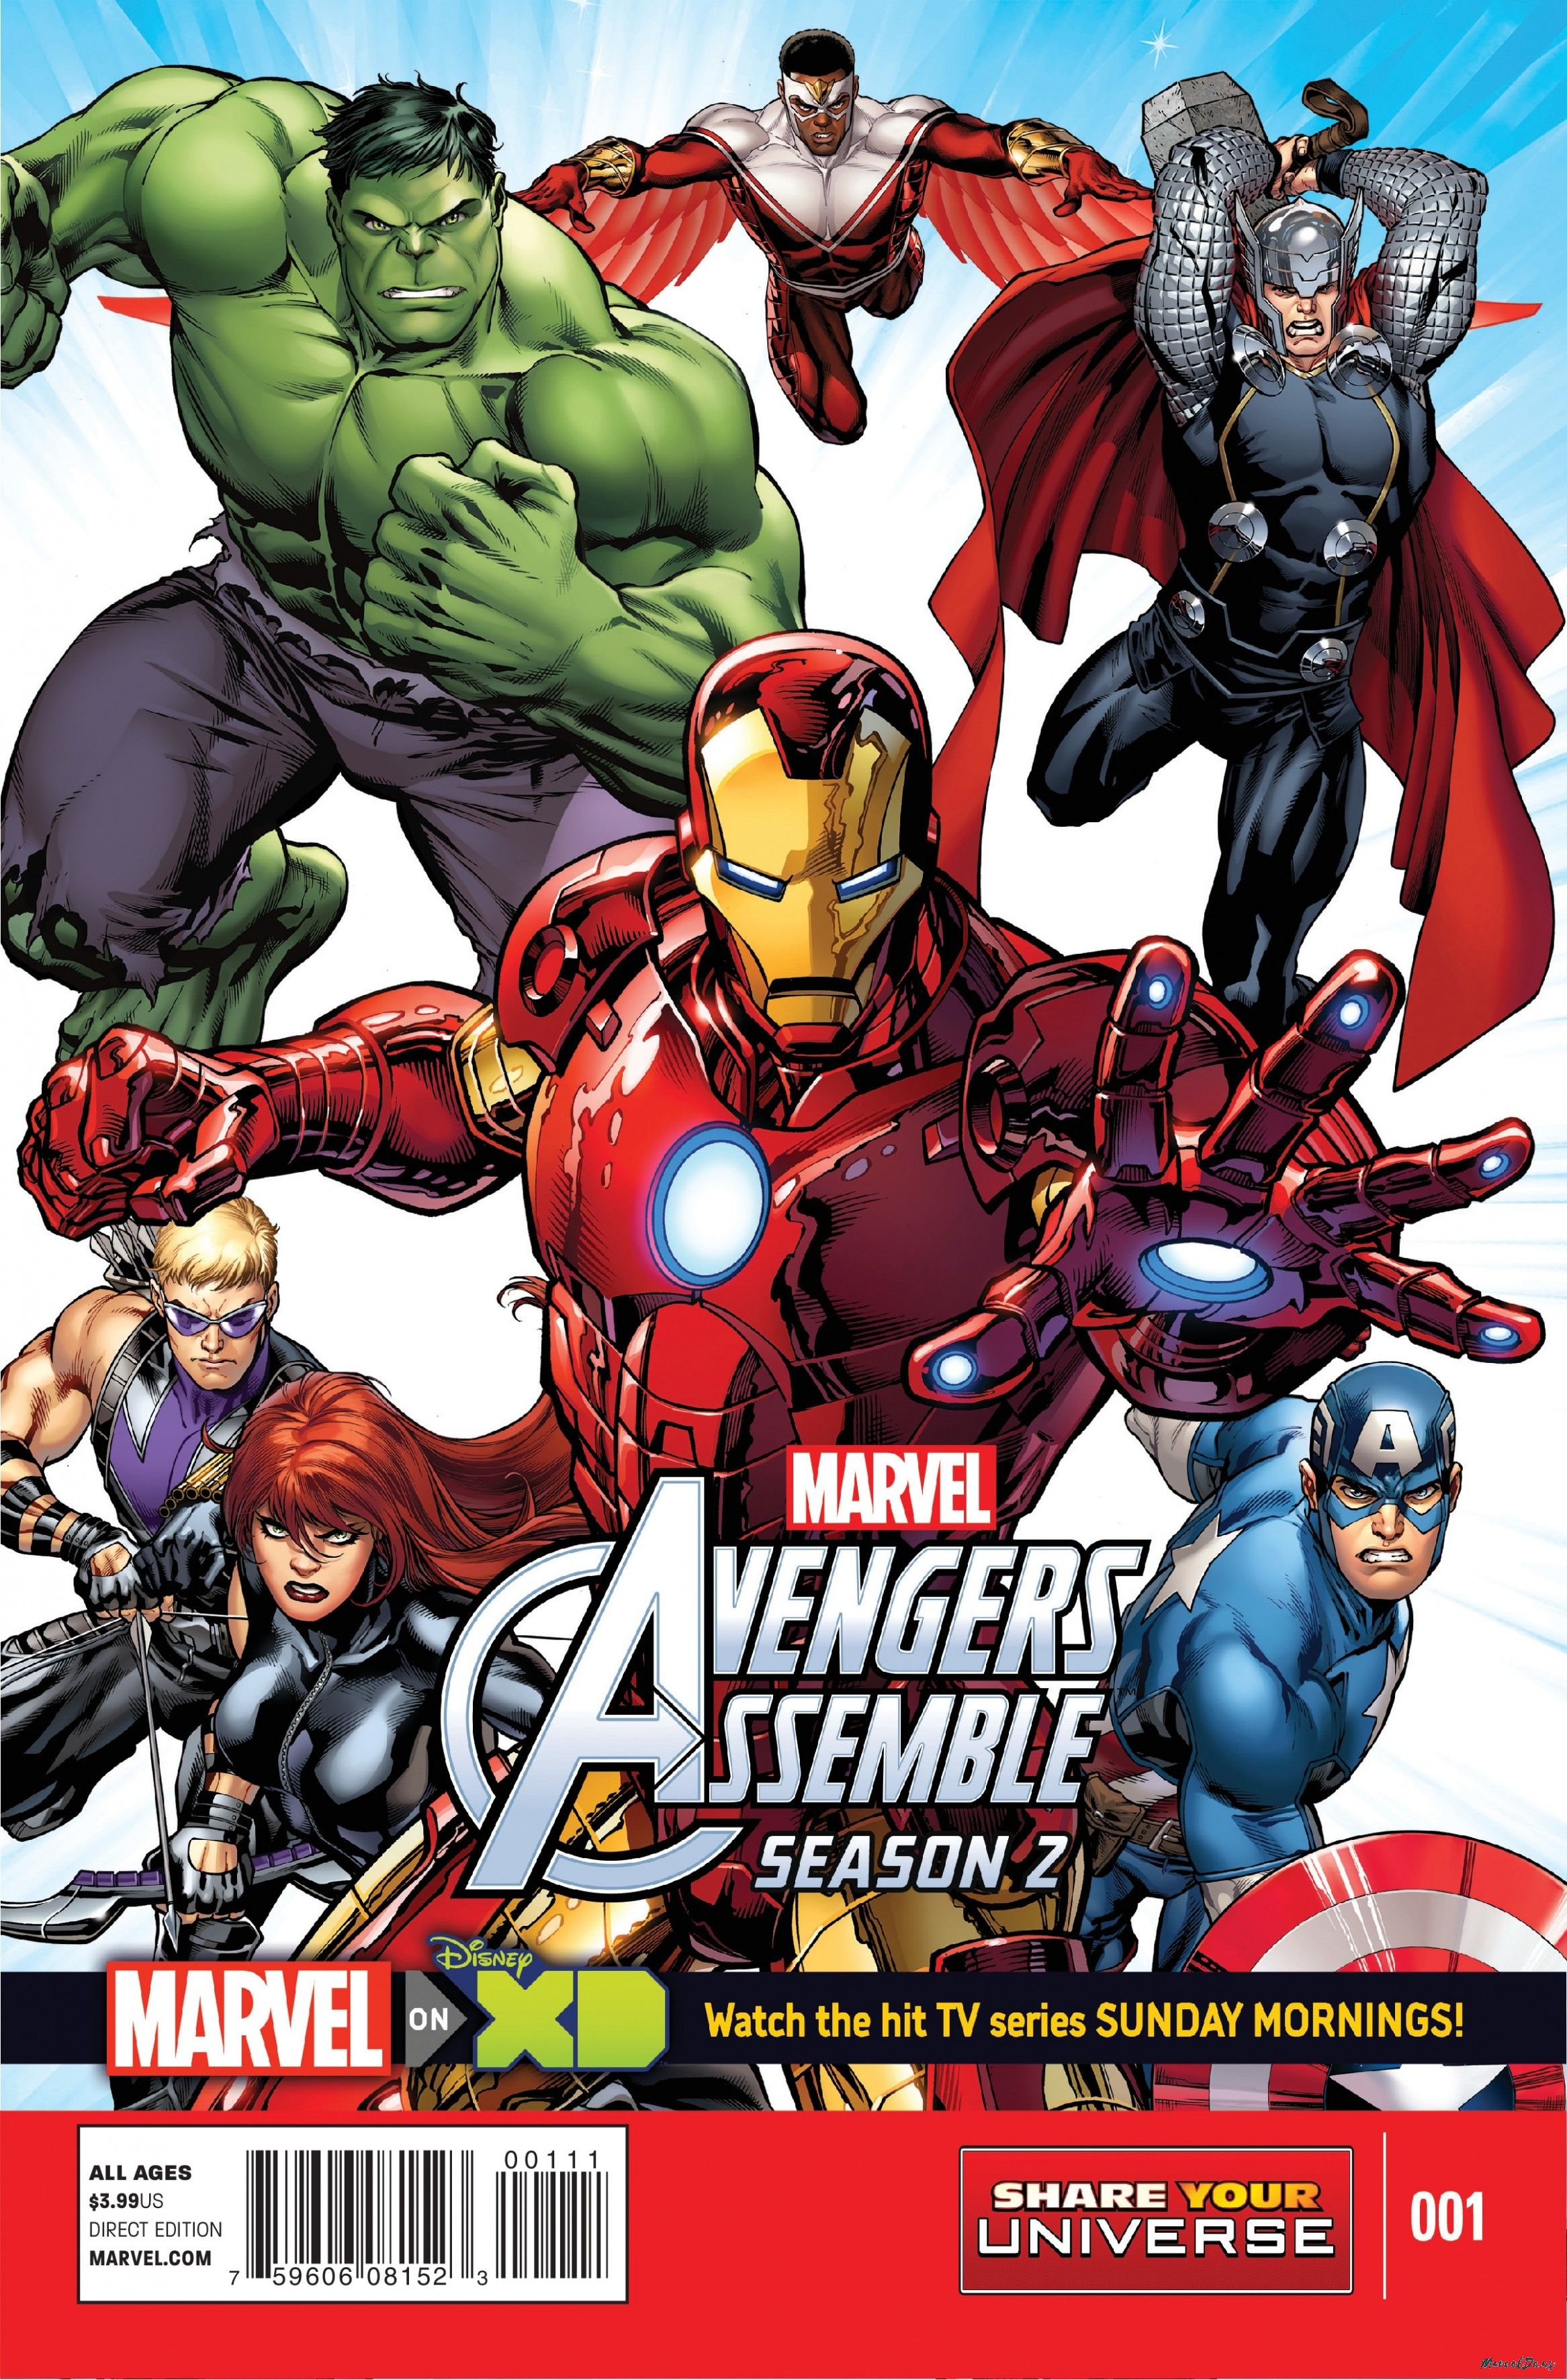 How Marvel Hq Avengers Assemble Is. Heroes of marvel and dc